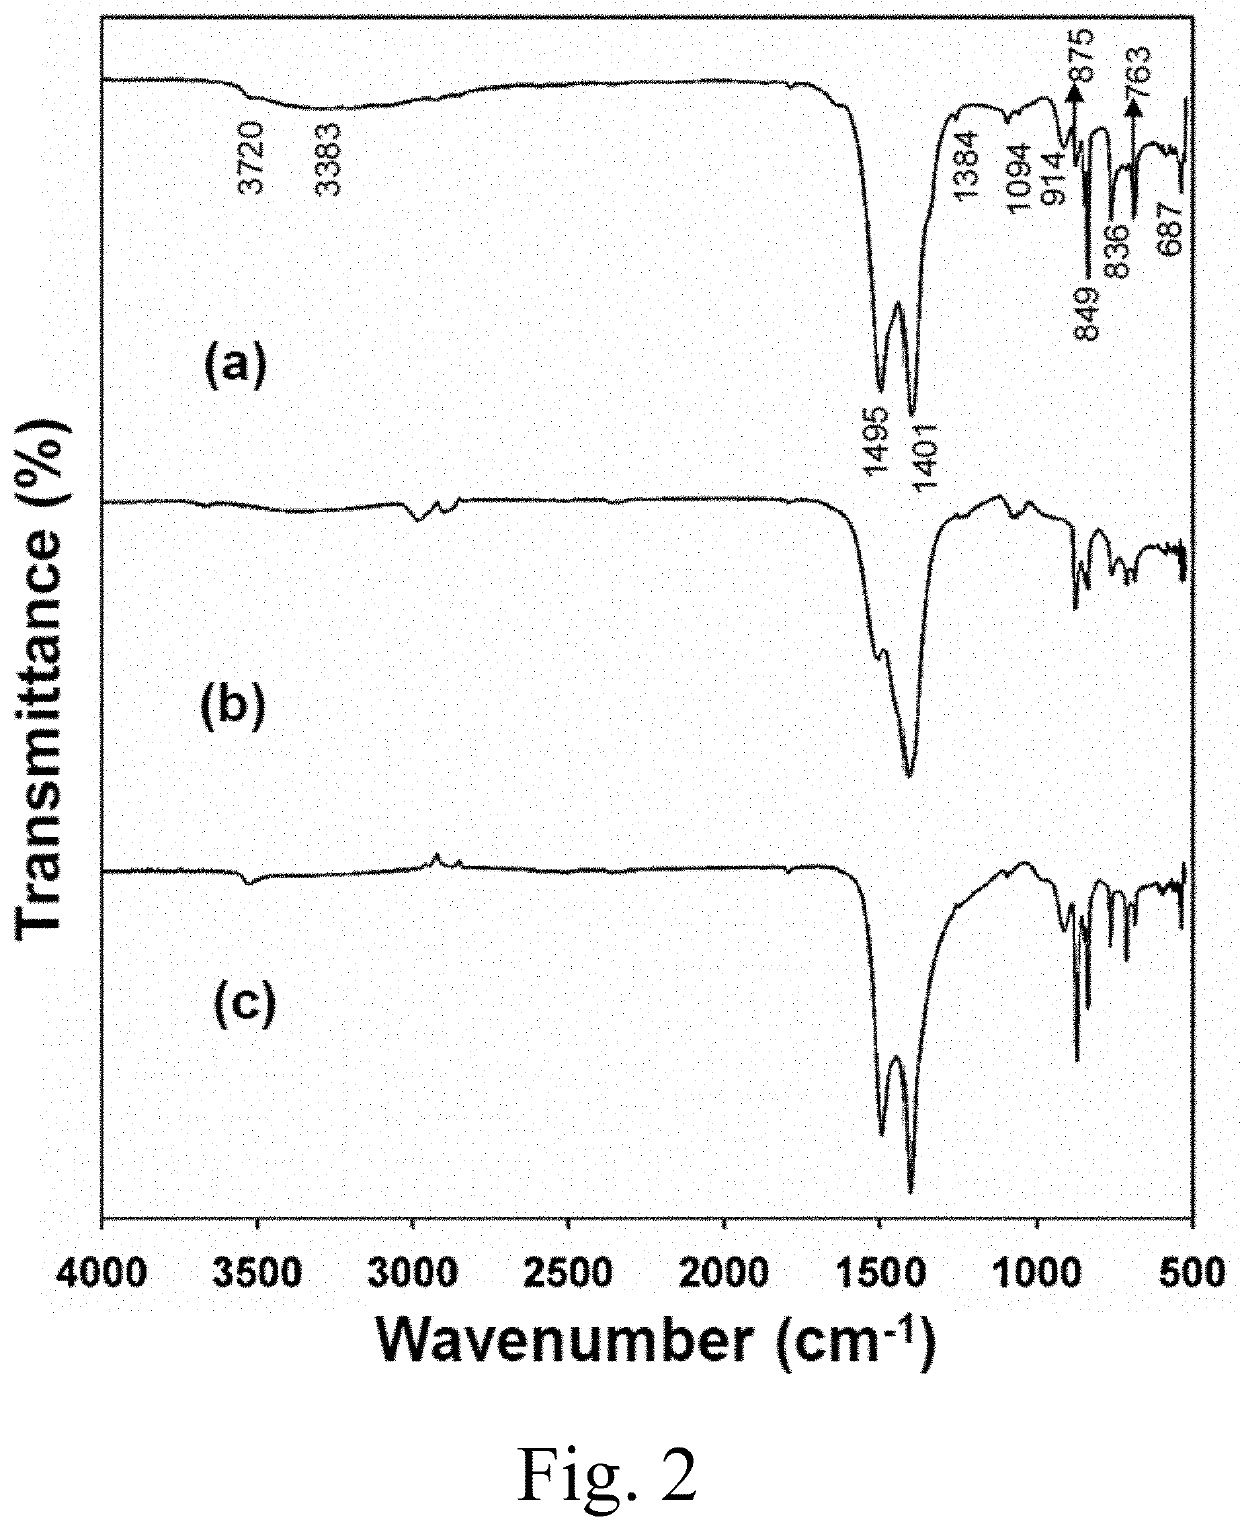 Ca-y-carbonate nanosheets, their use, and synthesis